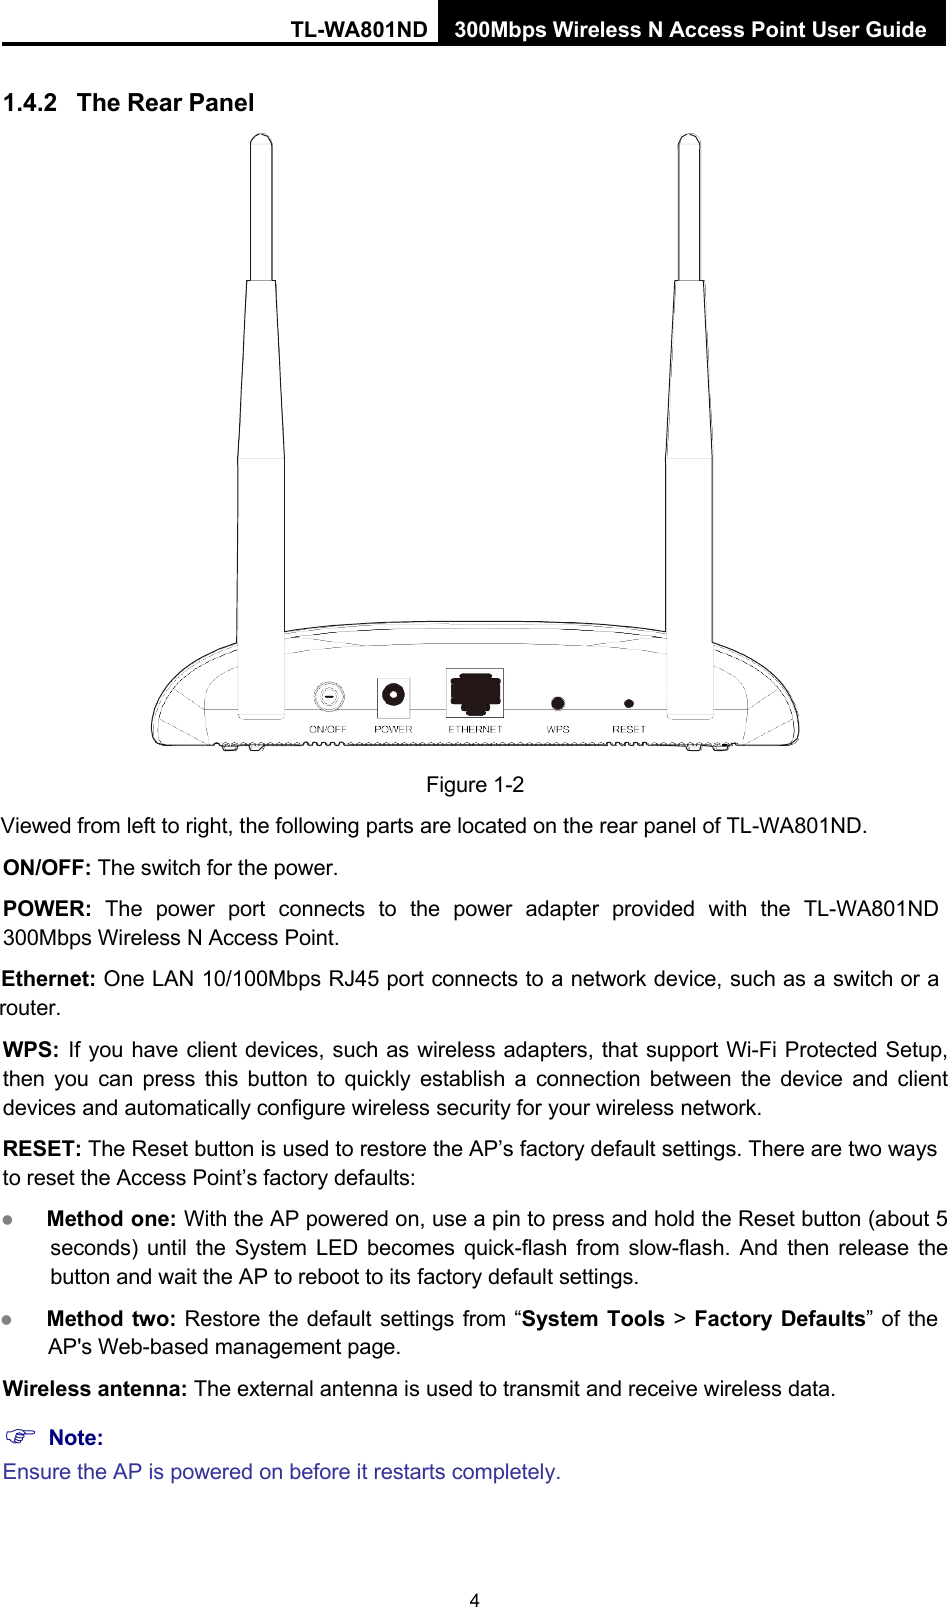 TL-WA801ND 300Mbps Wireless N Access Point User Guide 4    1.4.2 The Rear Panel    Figure 1-2 Viewed from left to right, the following parts are located on the rear panel of TL-WA801ND. ON/OFF: The switch for the power. POWER:  The  power  port  connects  to  the  power  adapter  provided  with  the  TL-WA801ND 300Mbps Wireless N Access Point. Ethernet: One LAN 10/100Mbps RJ45 port connects to a network device, such as a switch or a router. WPS: If you have client devices, such as wireless adapters, that support Wi-Fi Protected Setup, then you can press this button to quickly establish  a  connection between the device and client devices and automatically configure wireless security for your wireless network. RESET: The Reset button is used to restore the AP’s factory default settings. There are two ways to reset the Access Point’s factory defaults:  Method one: With the AP powered on, use a pin to press and hold the Reset button (about 5 seconds) until the System LED becomes quick-flash from slow-flash. And then release the button and wait the AP to reboot to its factory default settings.  Method two: Restore the default settings from “System Tools &gt; Factory Defaults” of the AP&apos;s Web-based management page. Wireless antenna: The external antenna is used to transmit and receive wireless data.  Note: Ensure the AP is powered on before it restarts completely. 